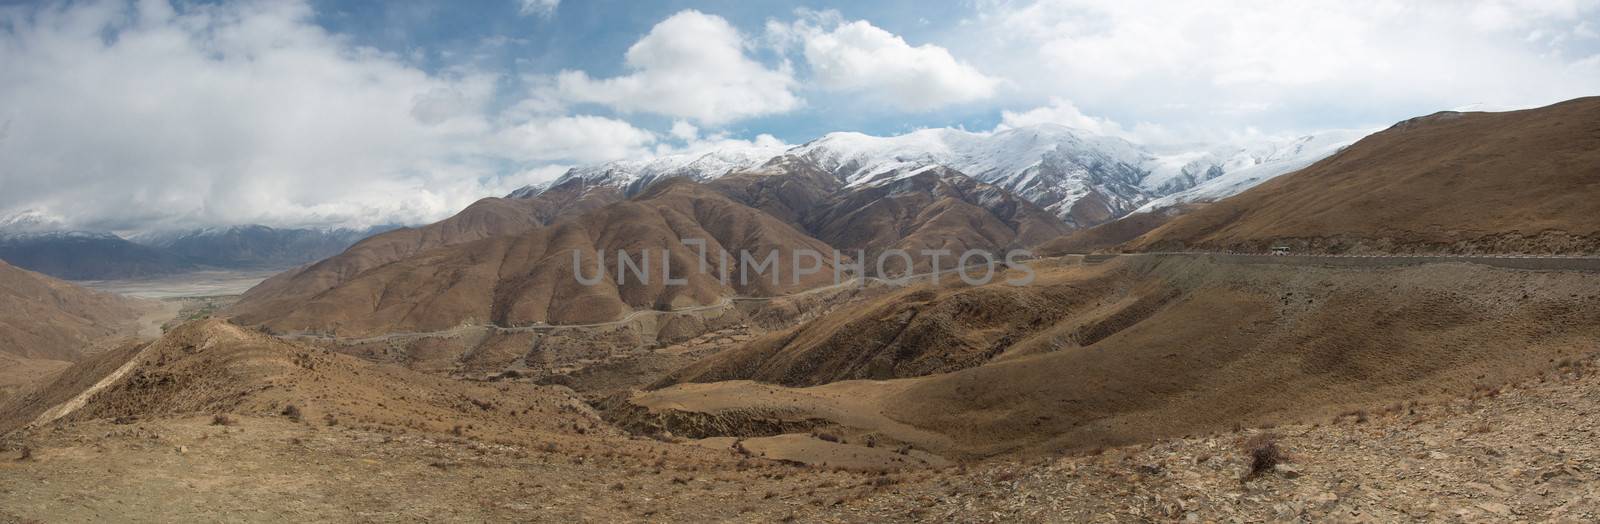 Panoramic view of the Friendship Road in Tibet gong from Lhasa and ending in Kathmandu, China.